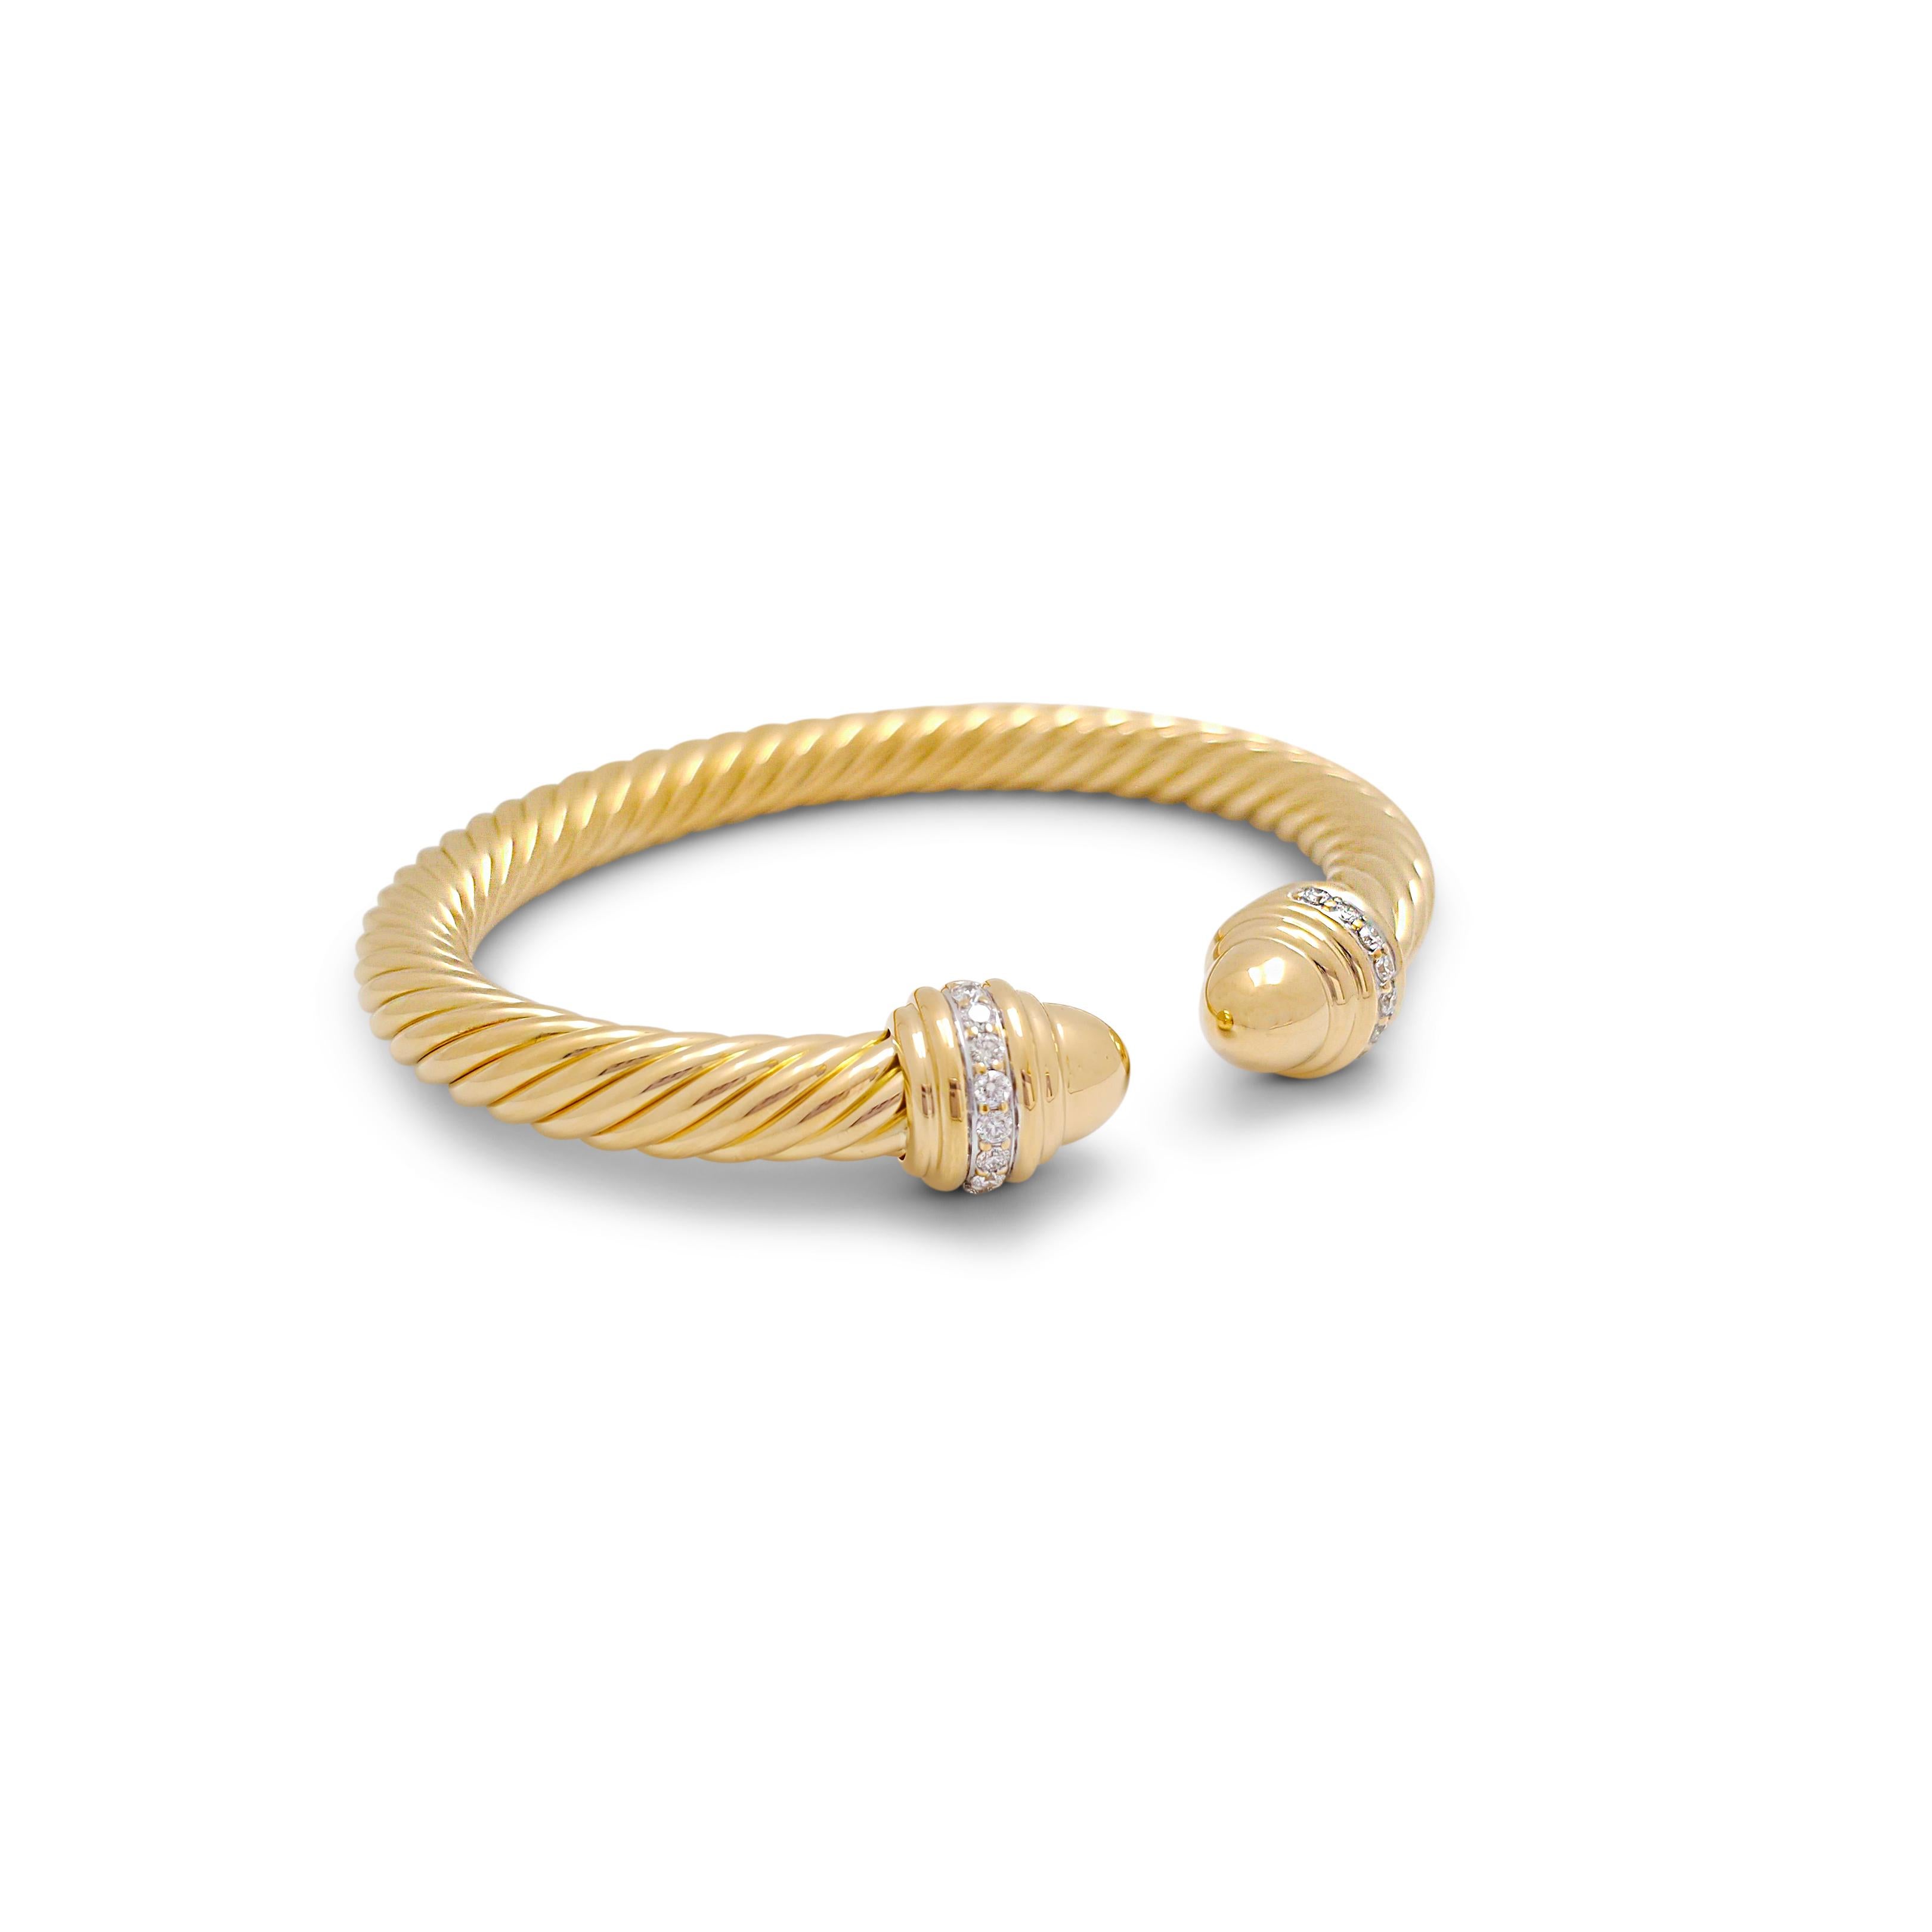 Authentic David Yurman bangle crafted in 18 karat yellow gold. The bracelet is finished with diamond accented domes on either side of the iconic split bangle for an estimated total weight of 0.41 carats. The bangle is a size medium and fits up to a